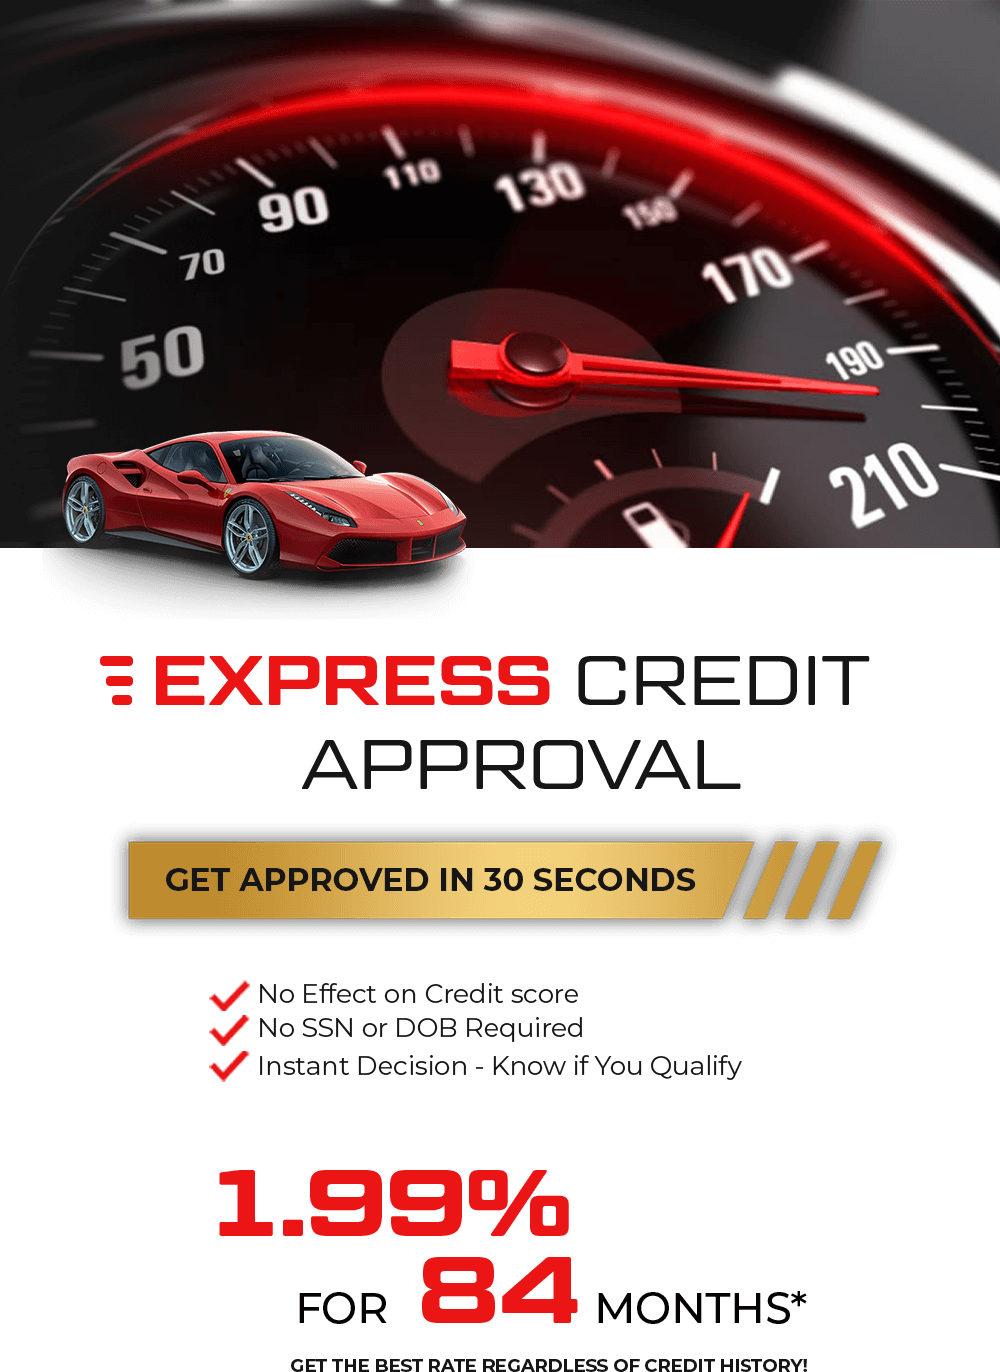 Express Credit Approval